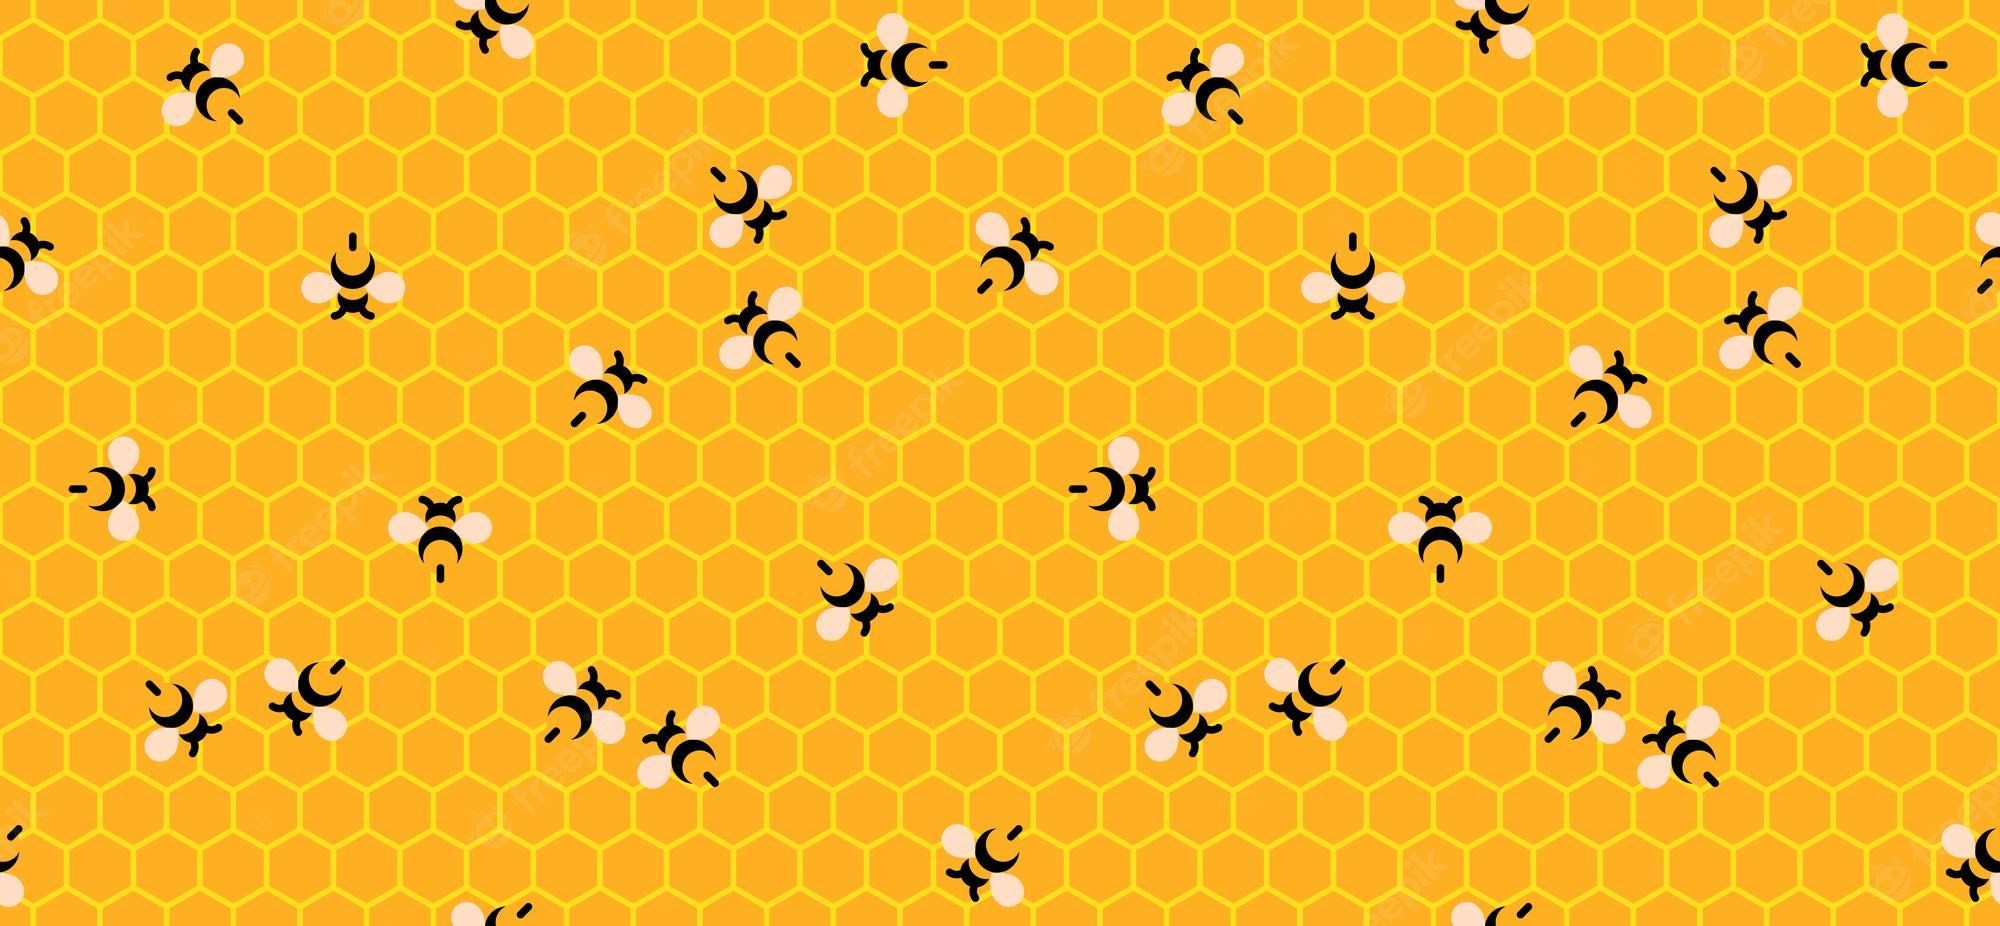 A pattern of bees on a honeycomb background - Honey